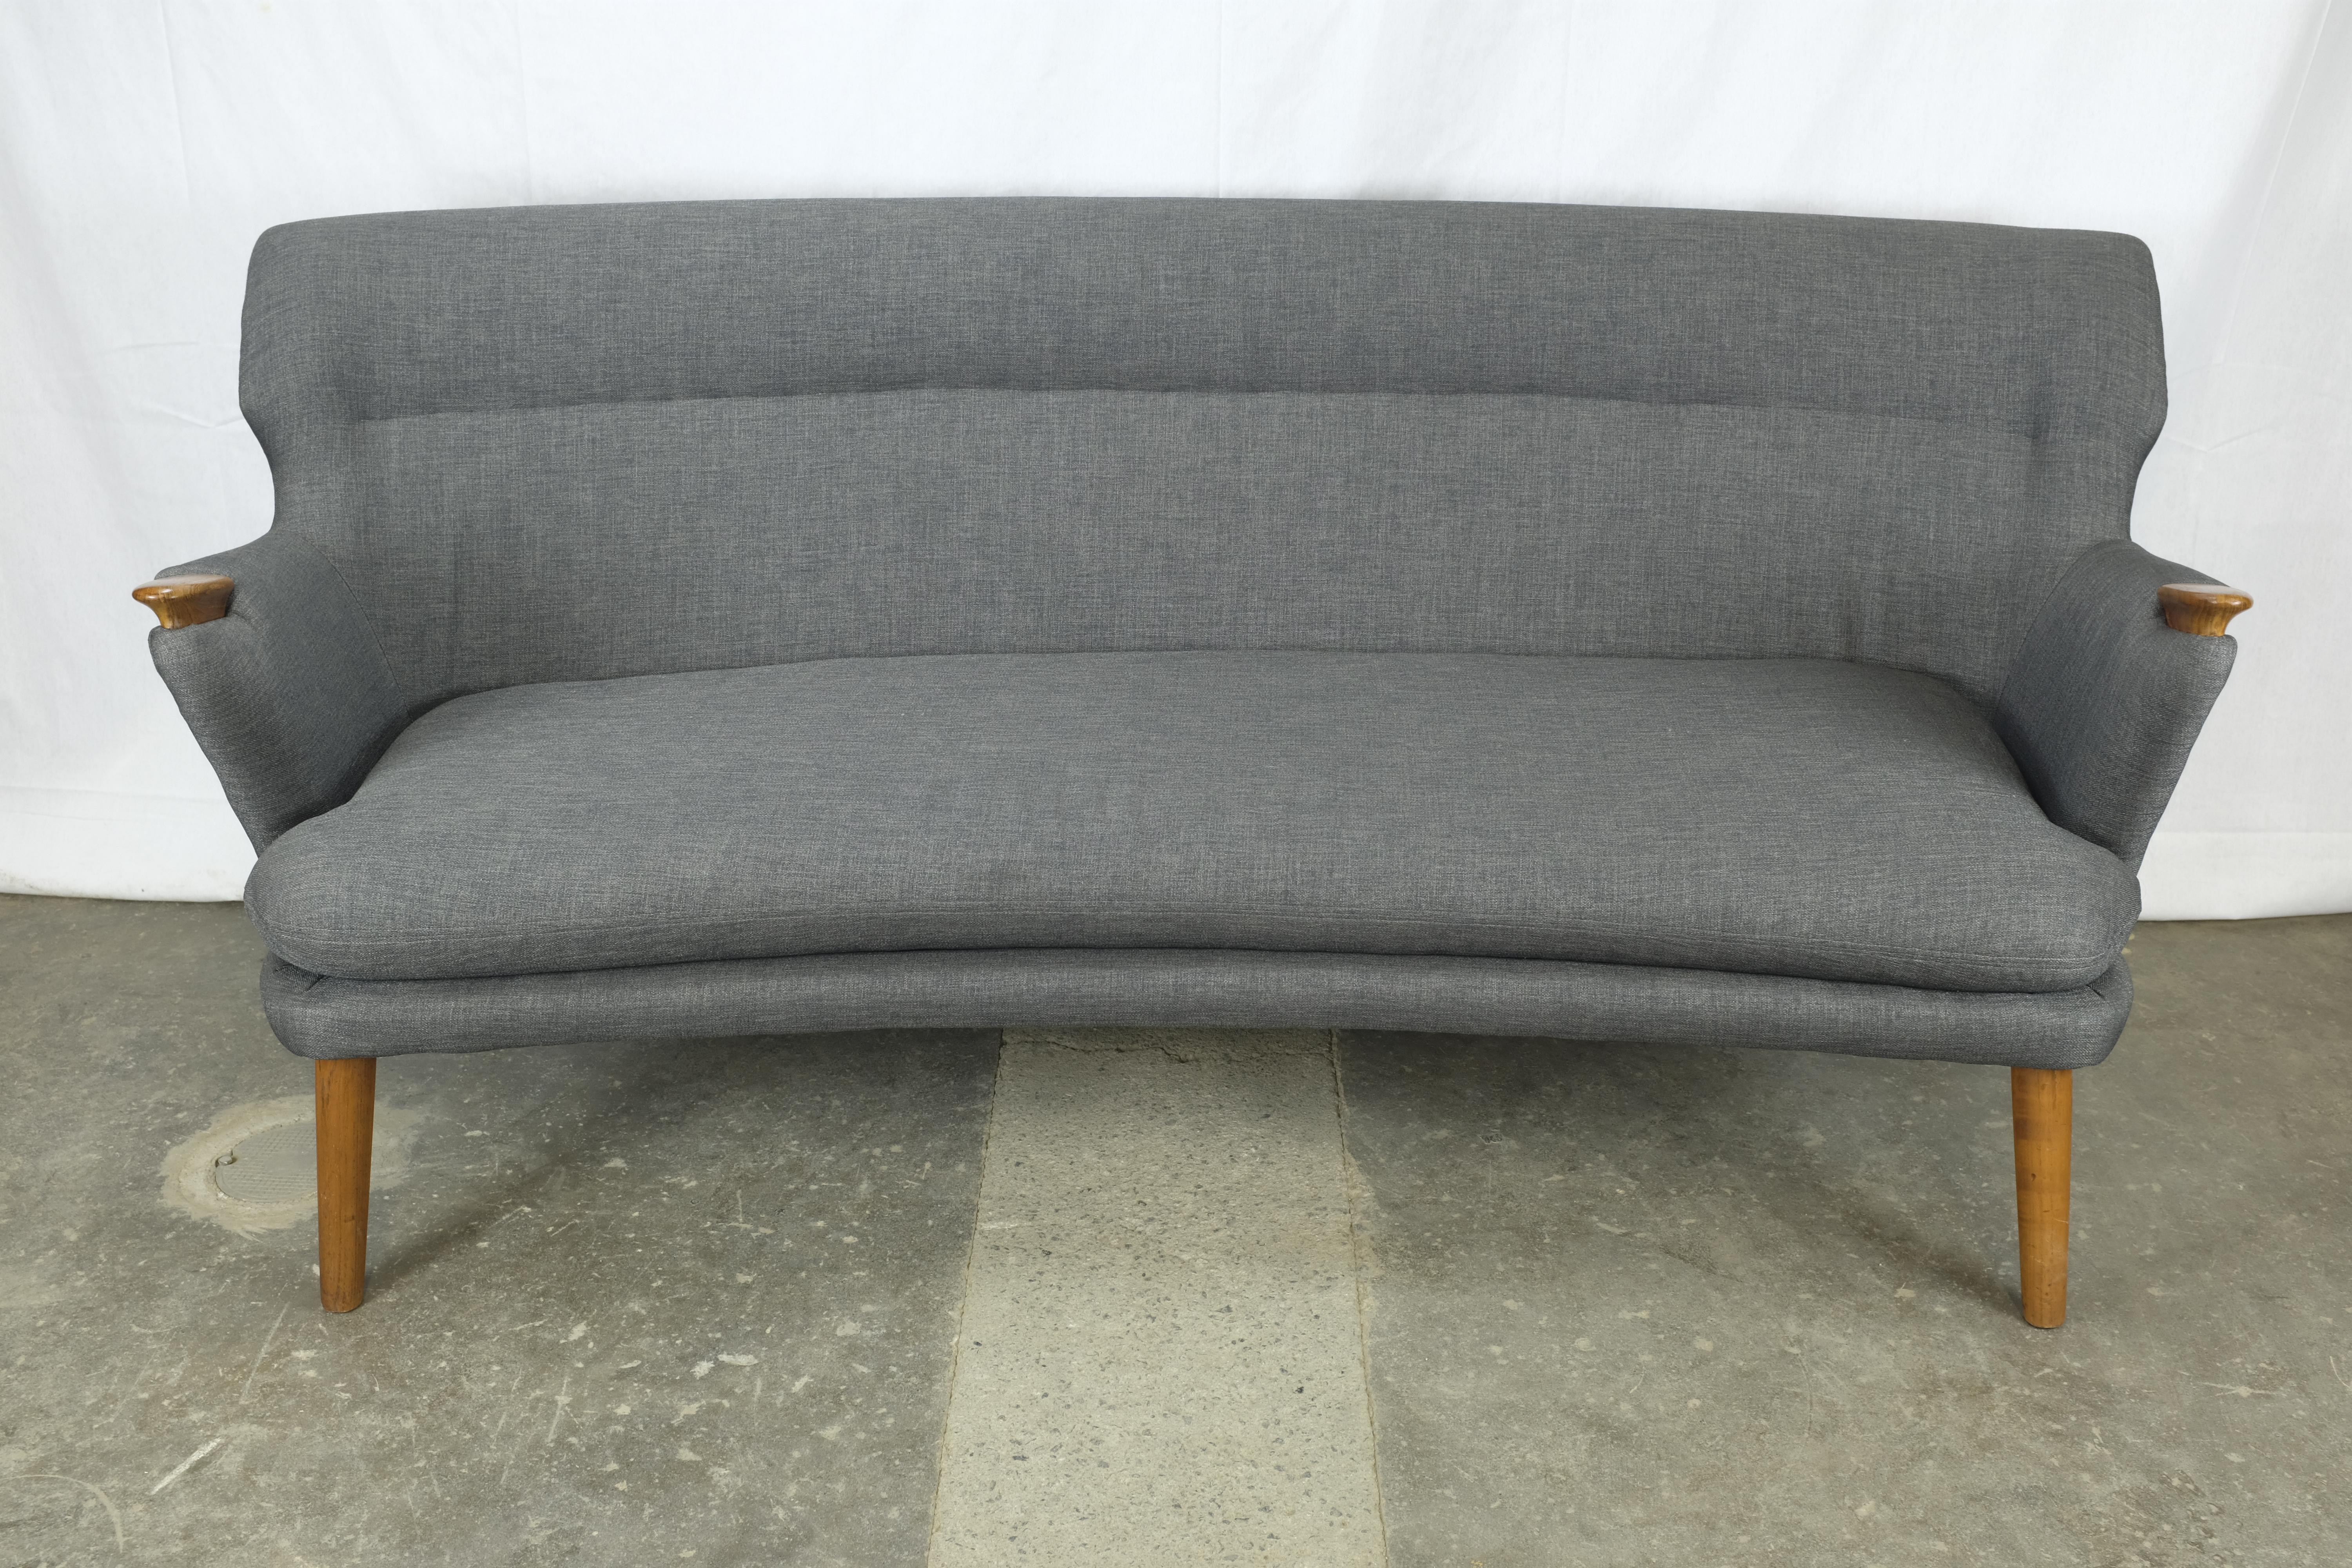 Sofa designed by Kurt Olsen and manufactured in Denmark by Slagelse Møbelvaerk. The back of the sofa has a gentle curve and the armrests have teak 'bear paw' teak arm caps.

The piece has been fully reupholstered with new webbing under the seat